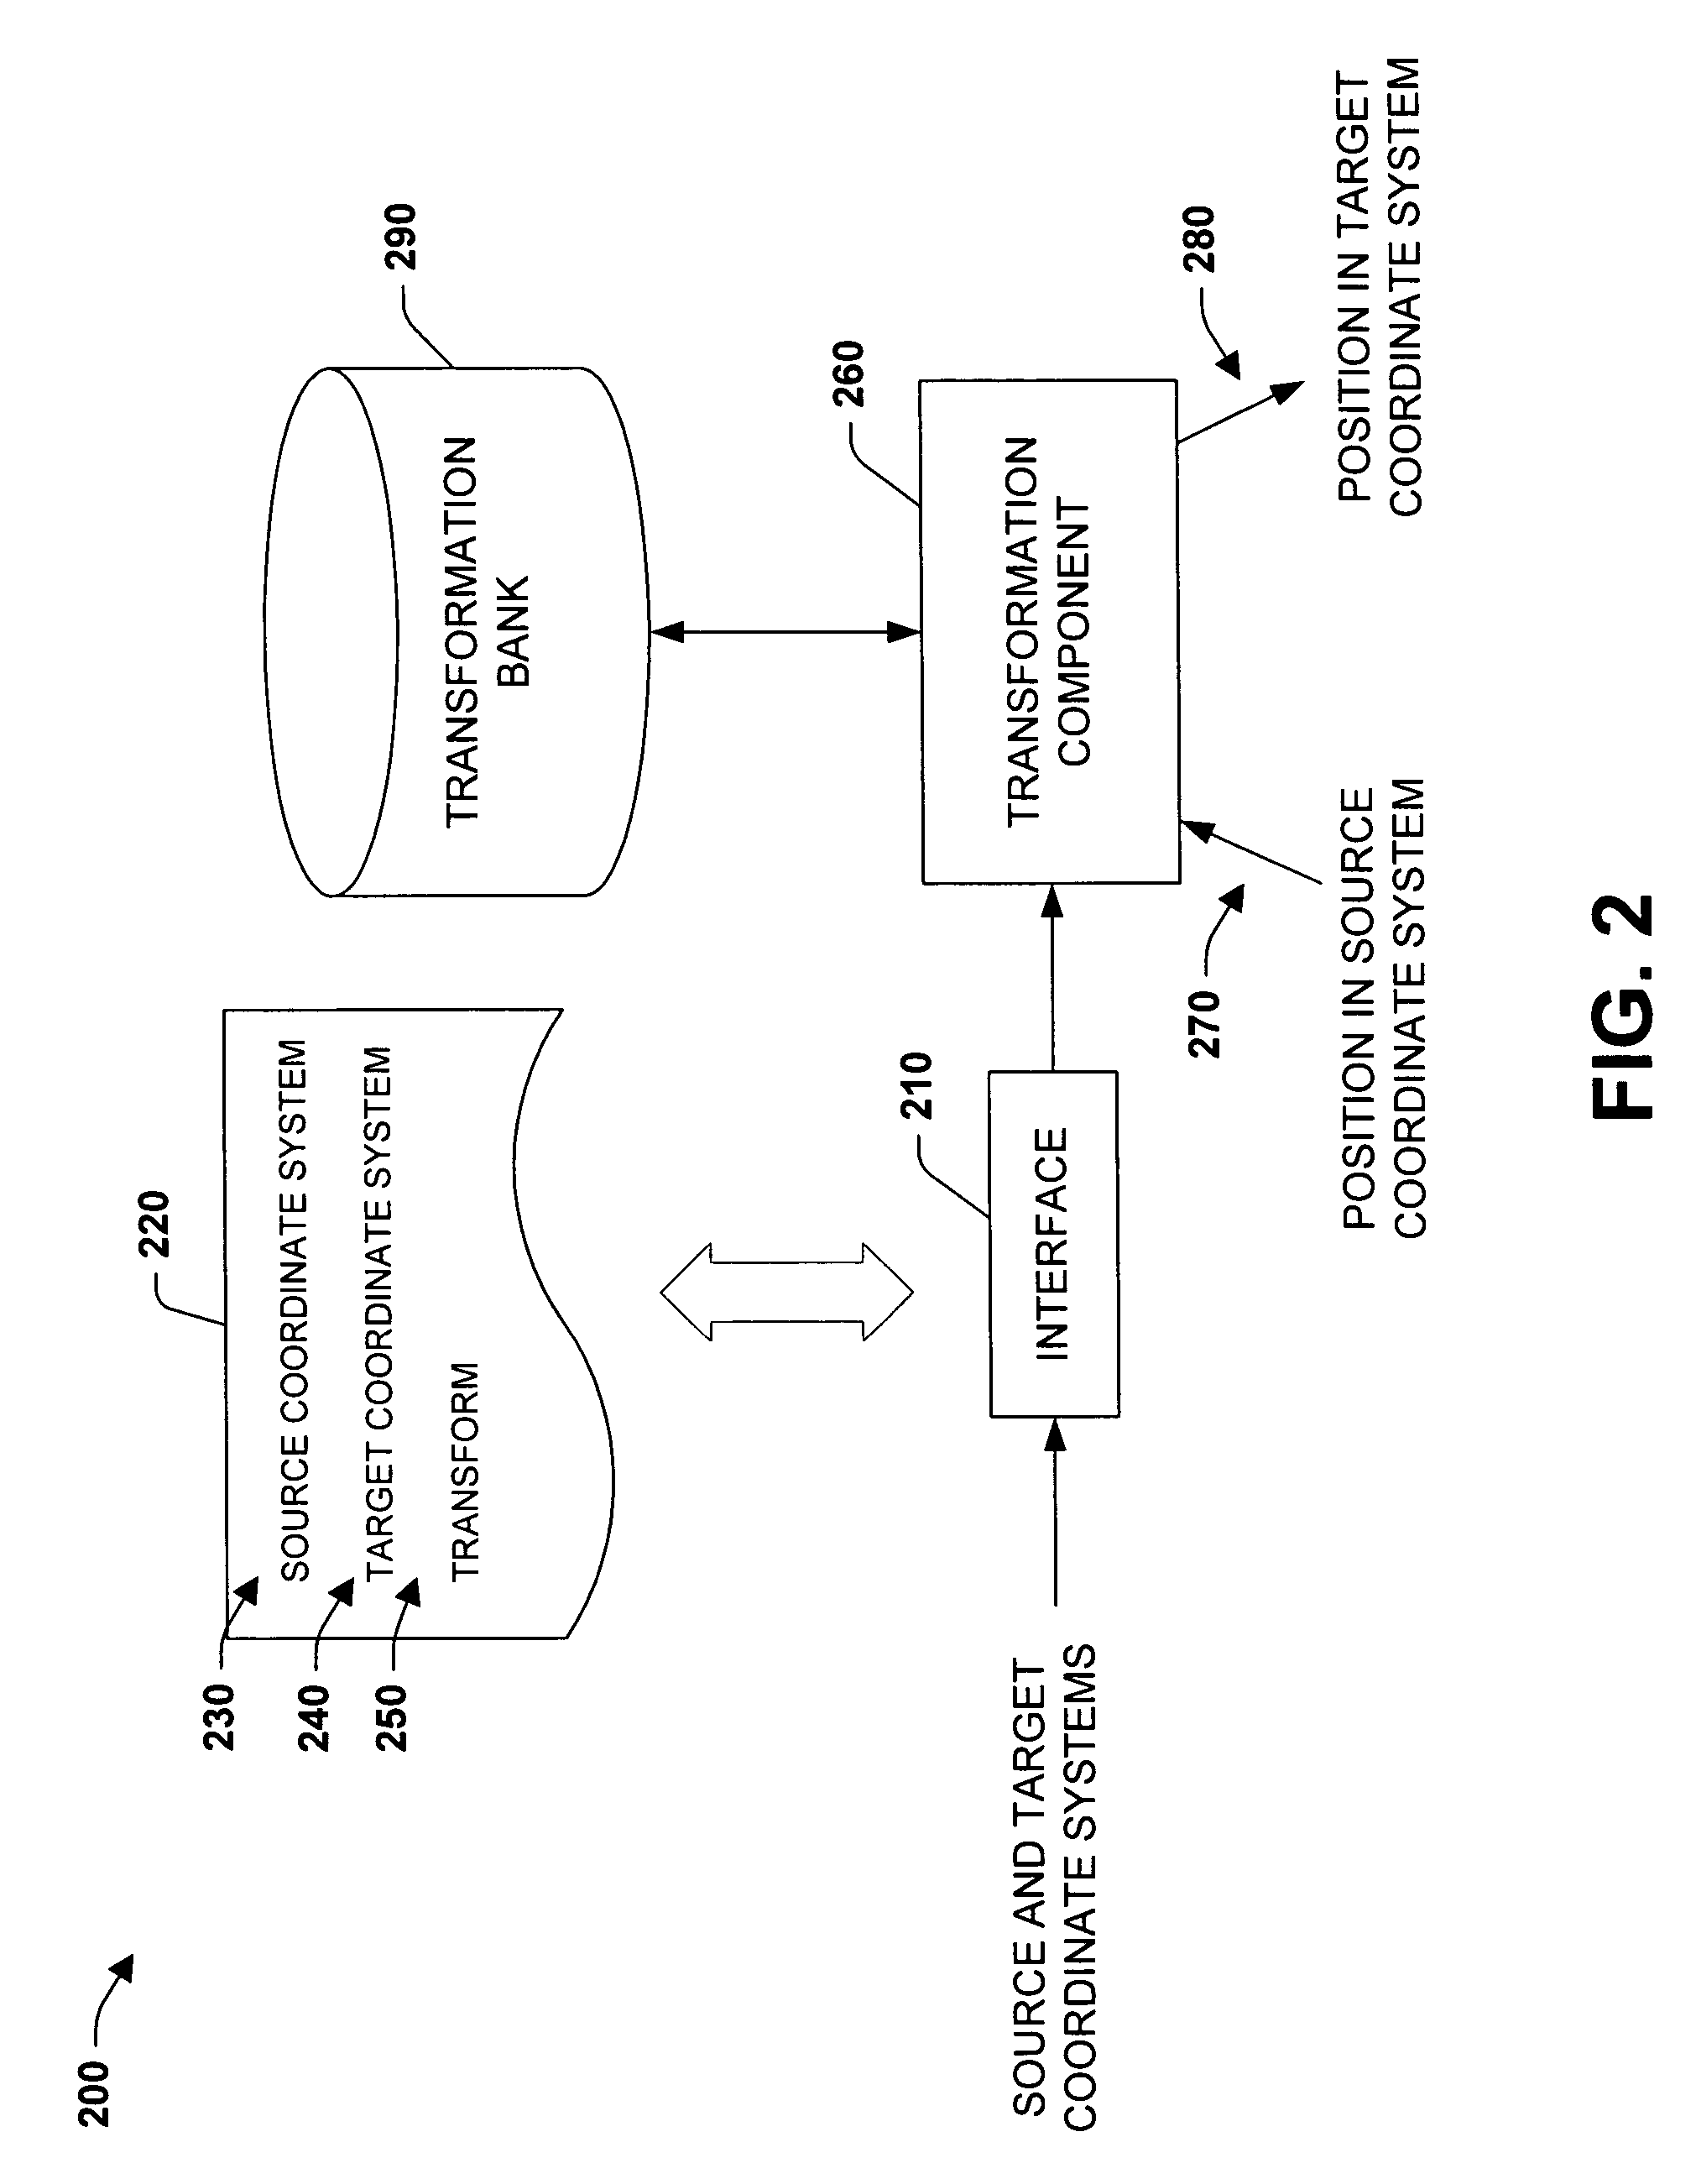 Systems and methods that facilitate motion control through coordinate system transformations